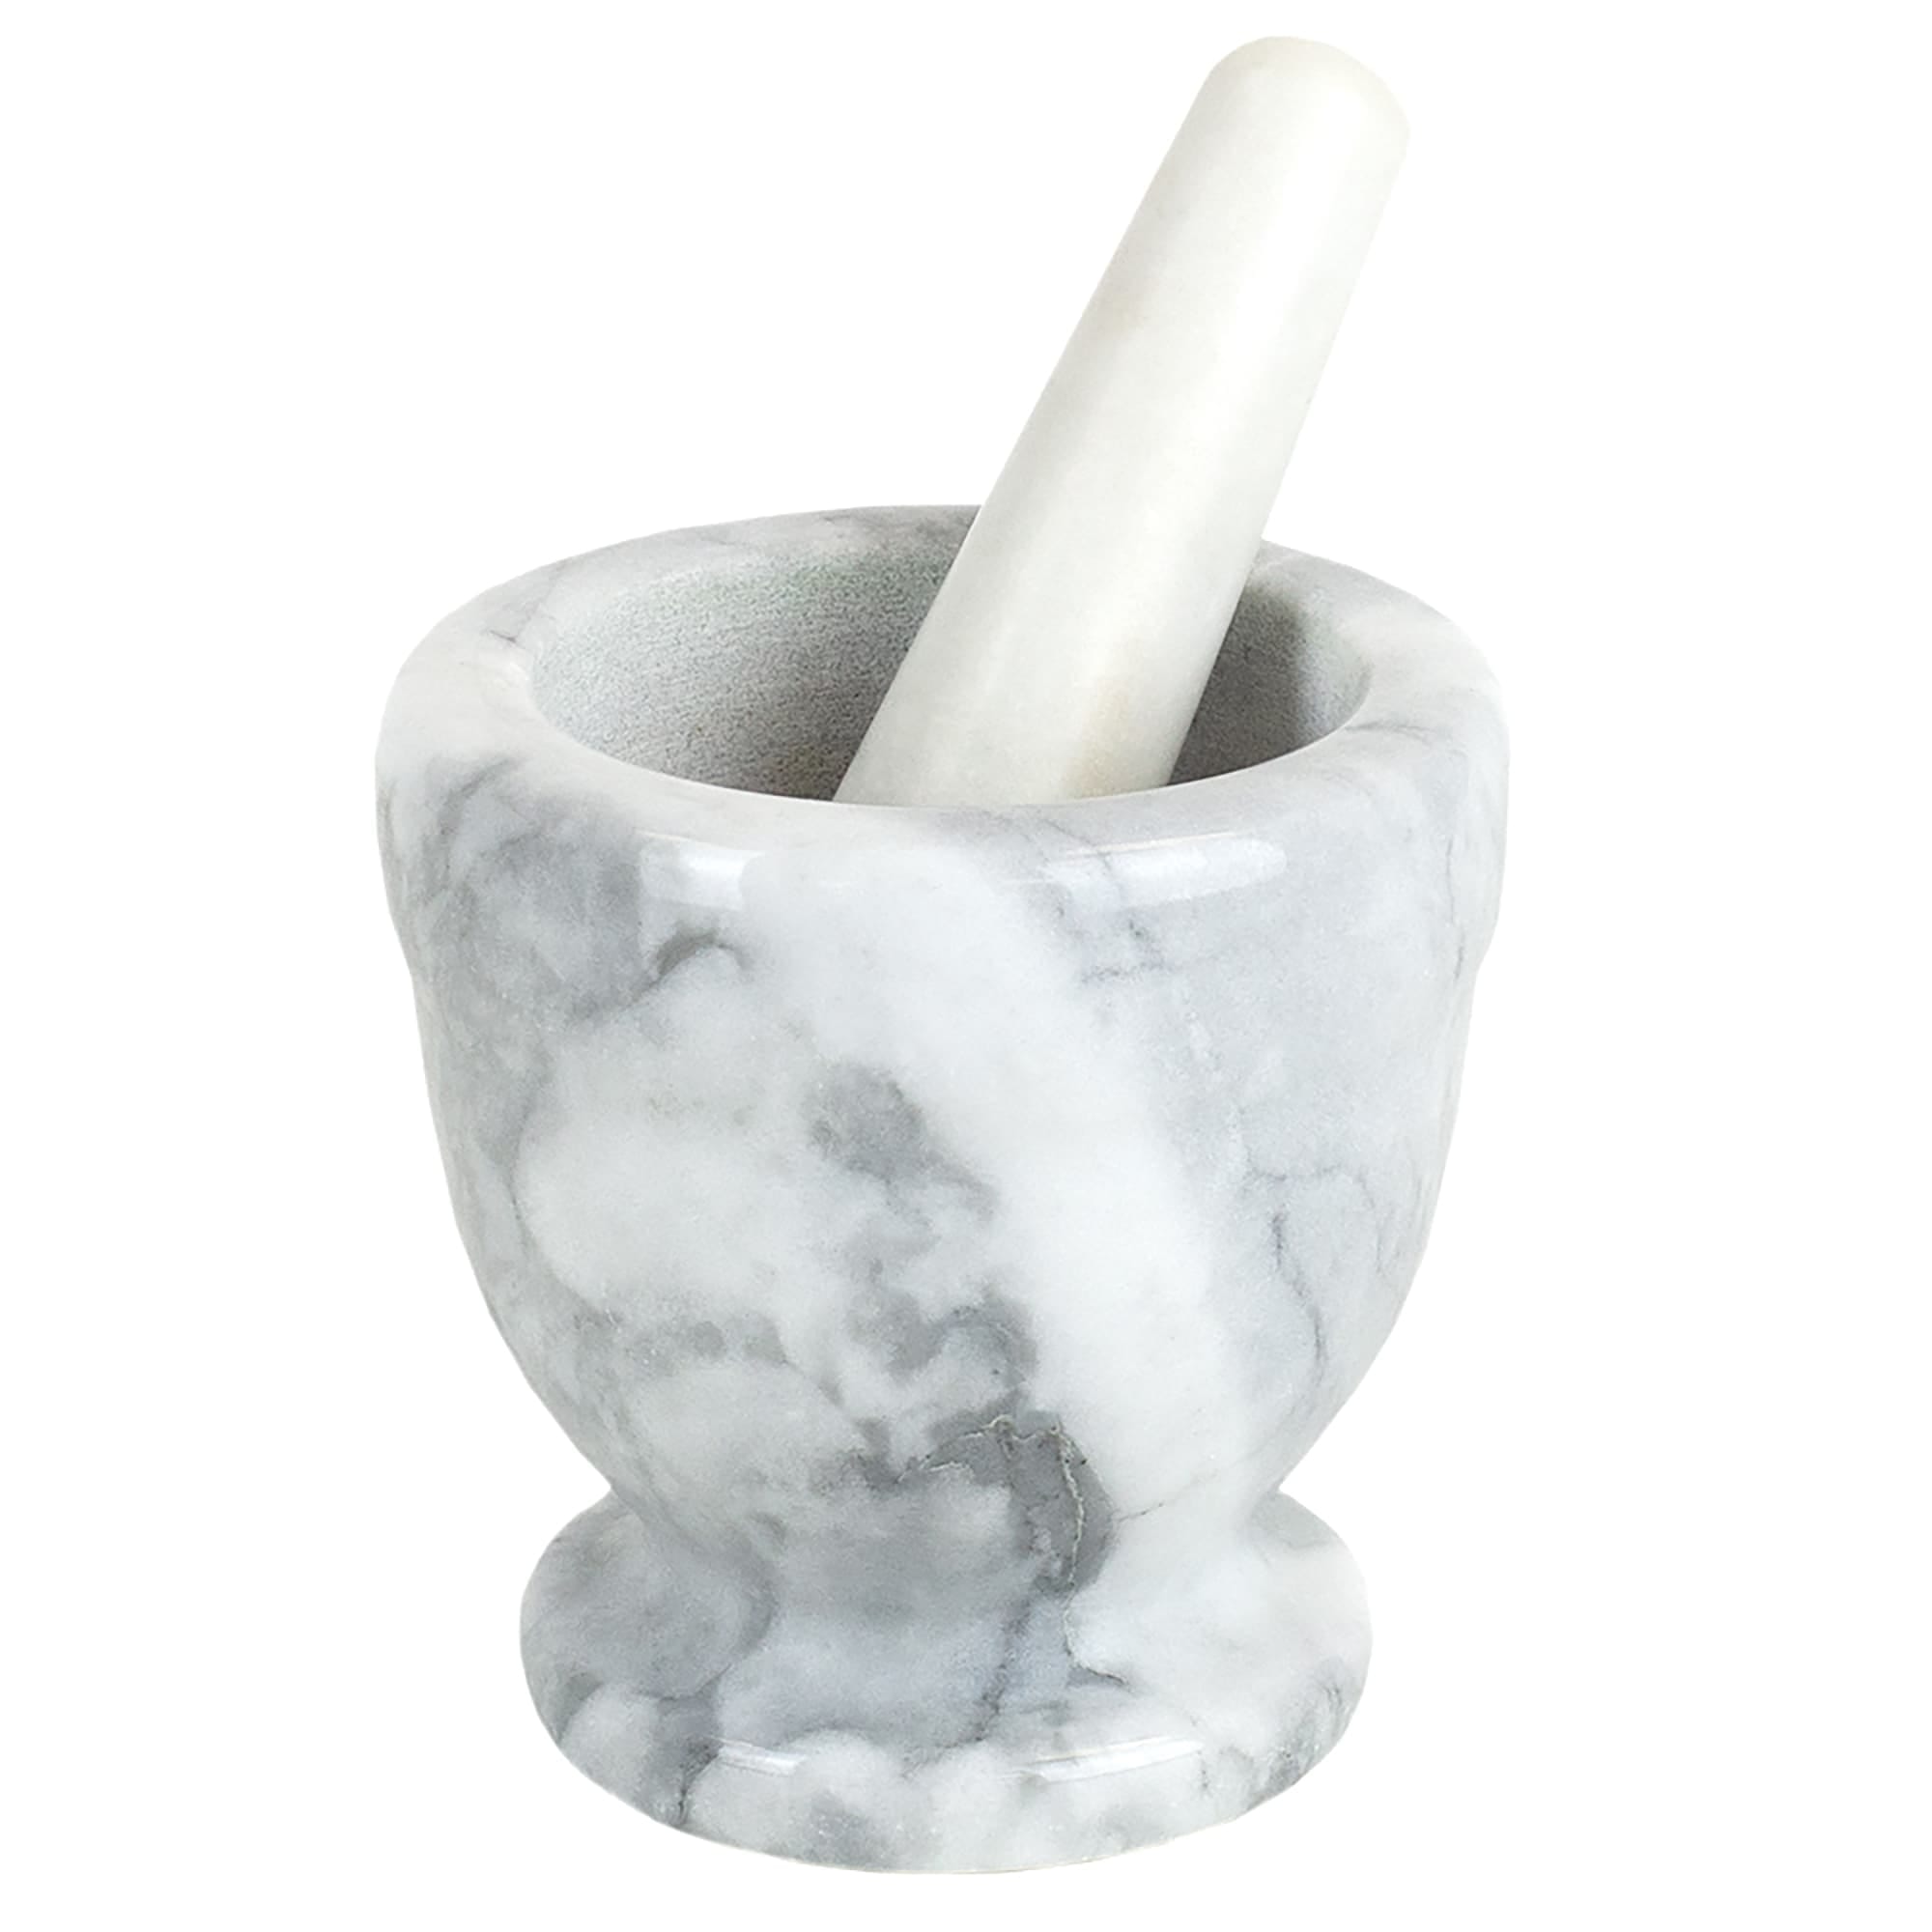 Marble Mortar And Pestle Set - Large Heavy White Marble - Quality